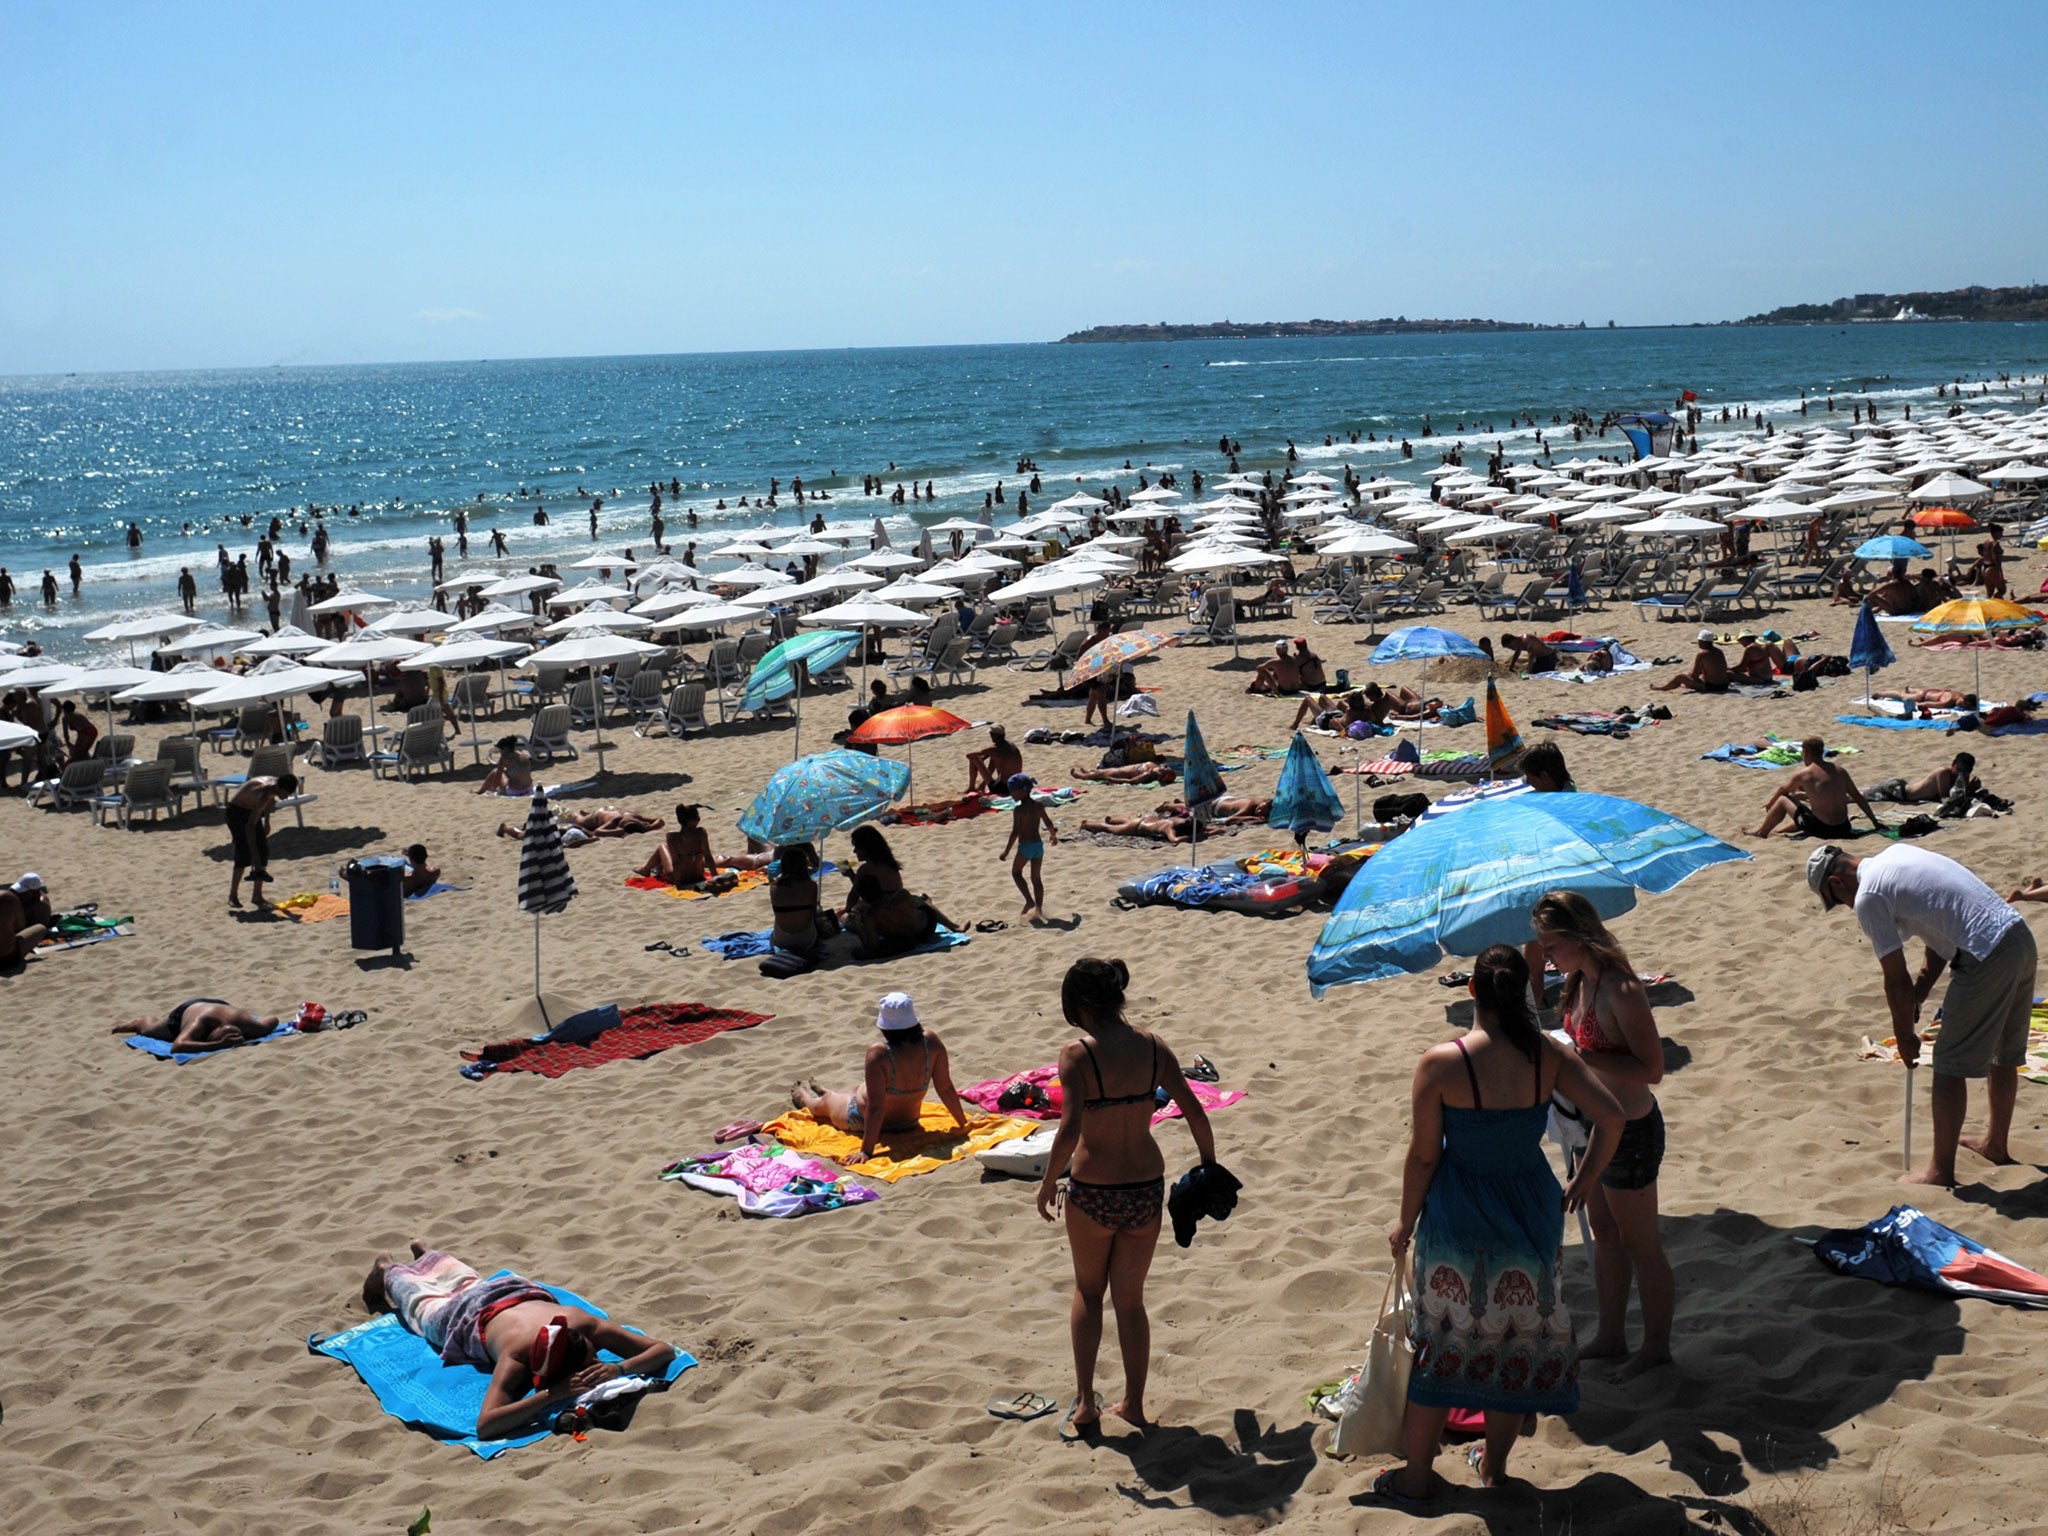 A basket of 10 typical tourist staples, including food and drink, sun cream and insect repellent, was found to be cheaper at Sunny Beach than at 19 other popular beach destinations in Europe